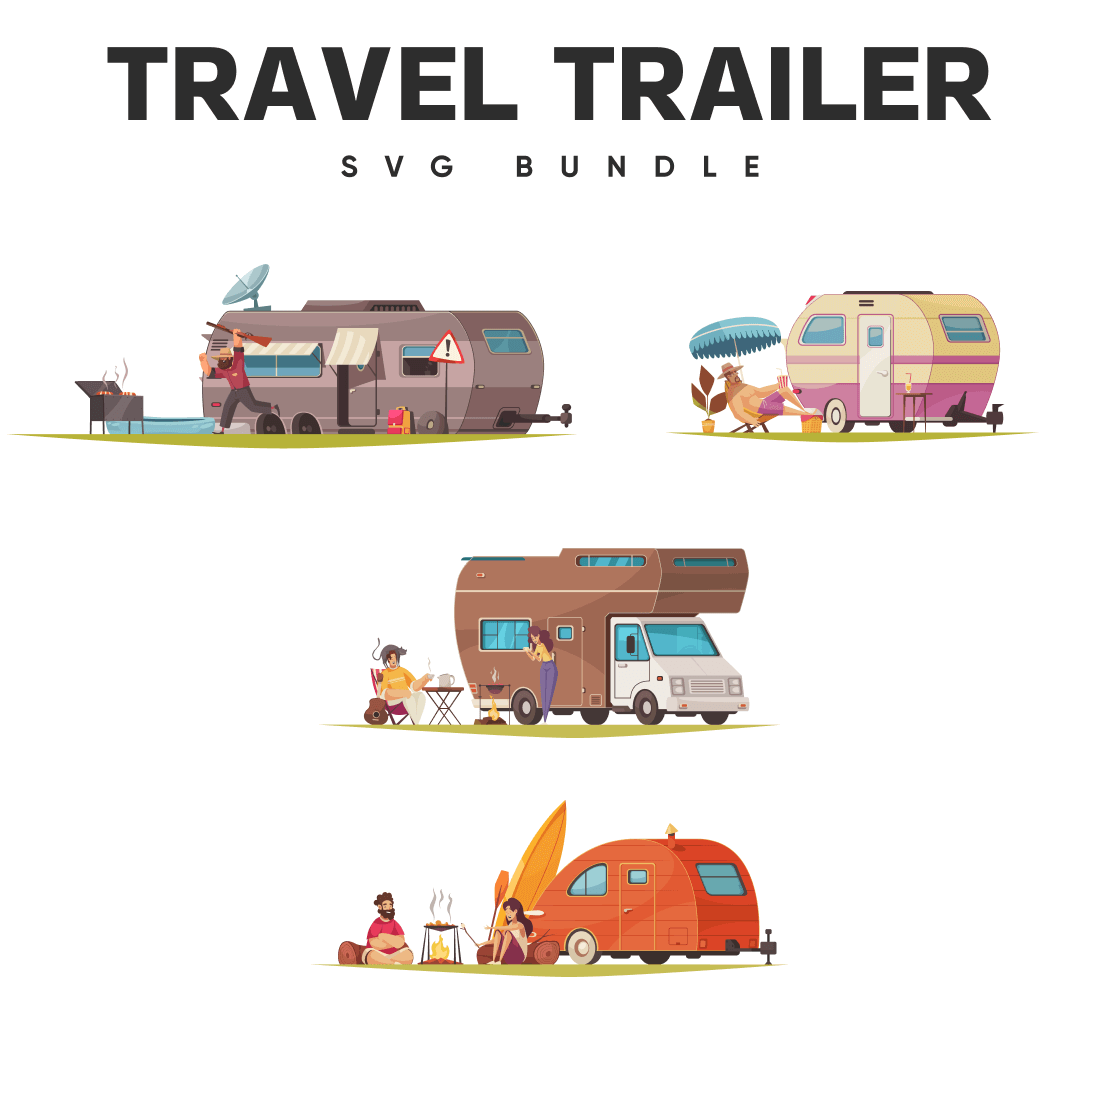 Travel trailer for family and personal vacations.